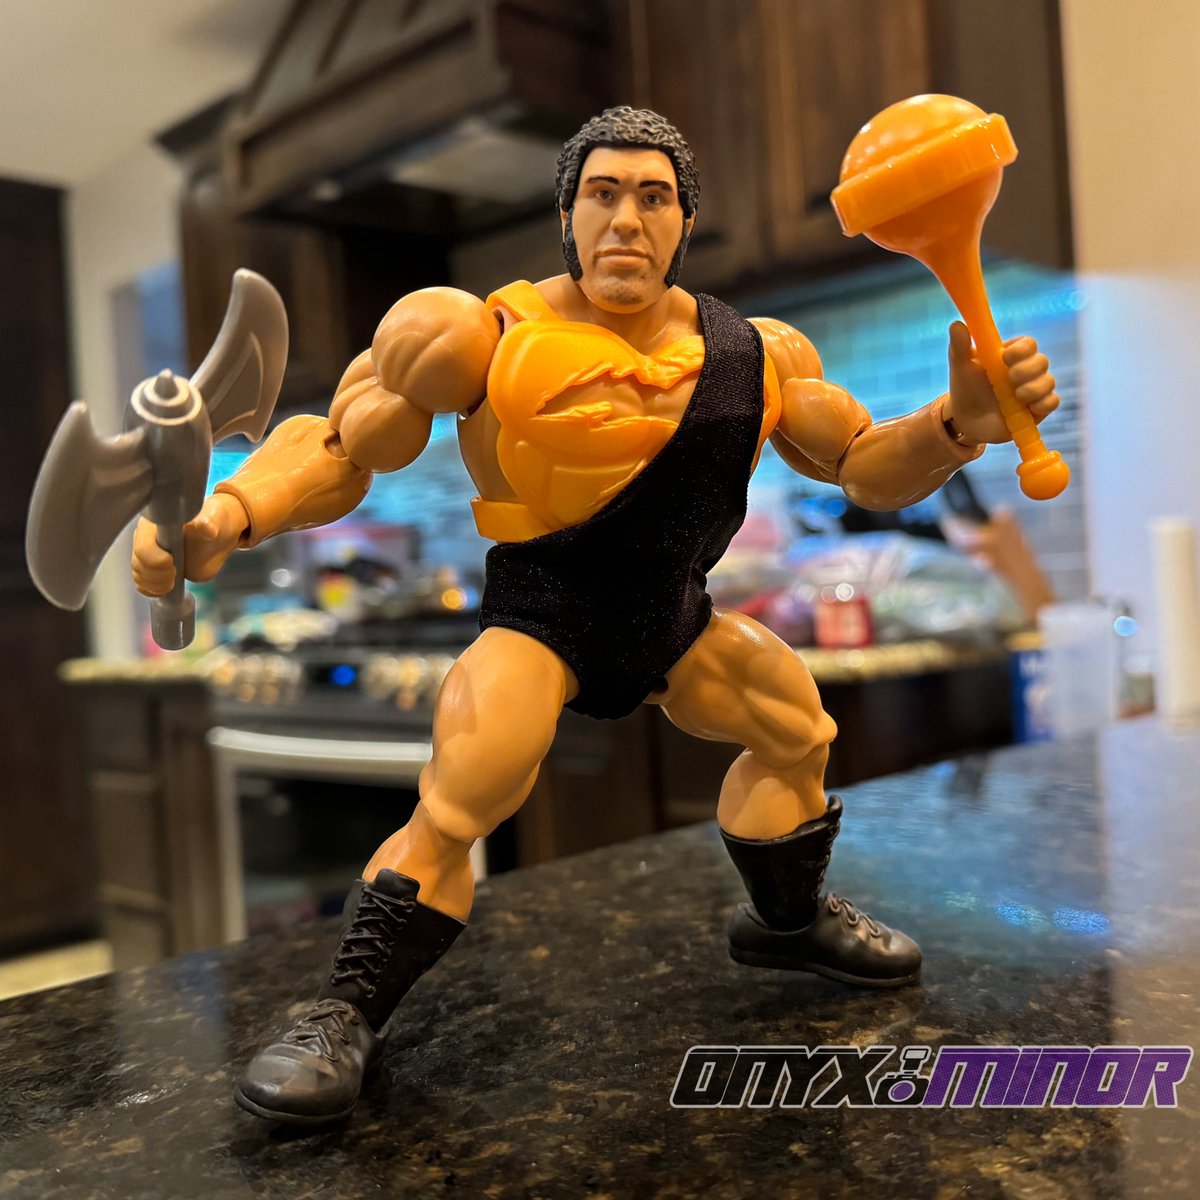 Definitely need *another* Sla’Ker to give this Andre armor. I might even dye or paint the bracers to MOTU-ify him even more. 

#motu #andrethegiant #wwe #motuorigins